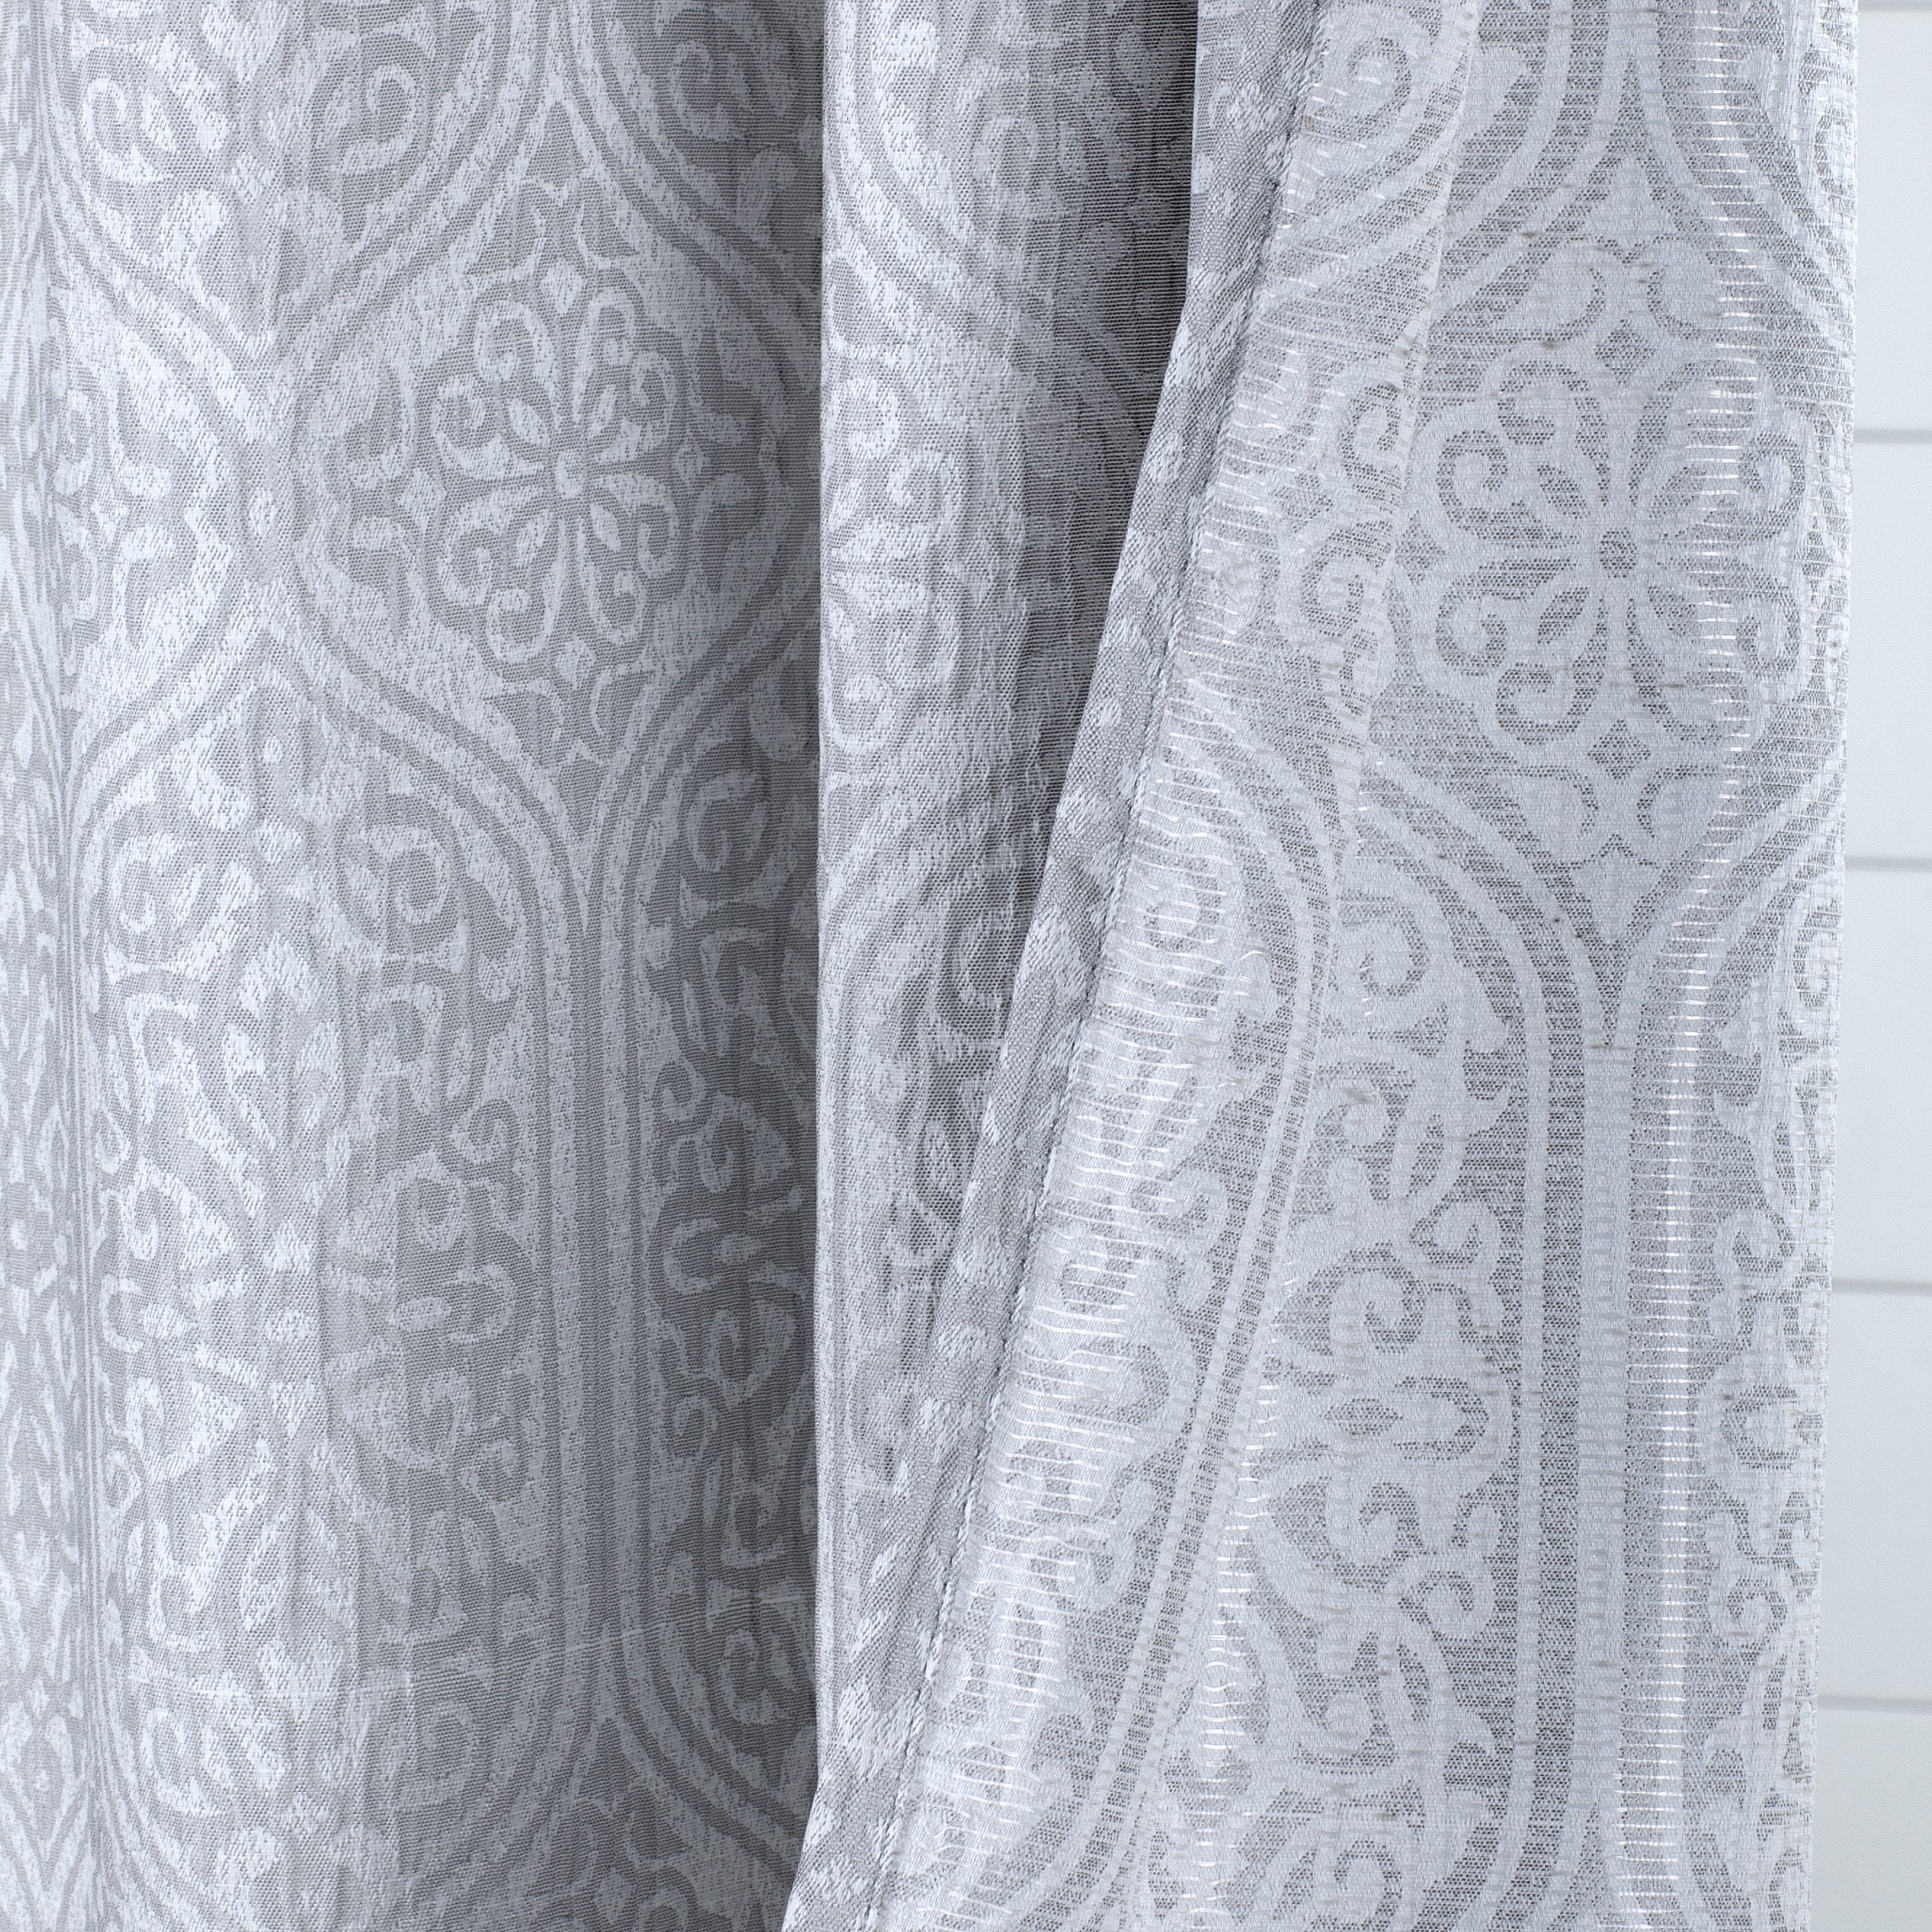 Dainty Home Shirin 3D Embossed Textured Cotton Feel Medallion Designed Fabric Shower Curtain